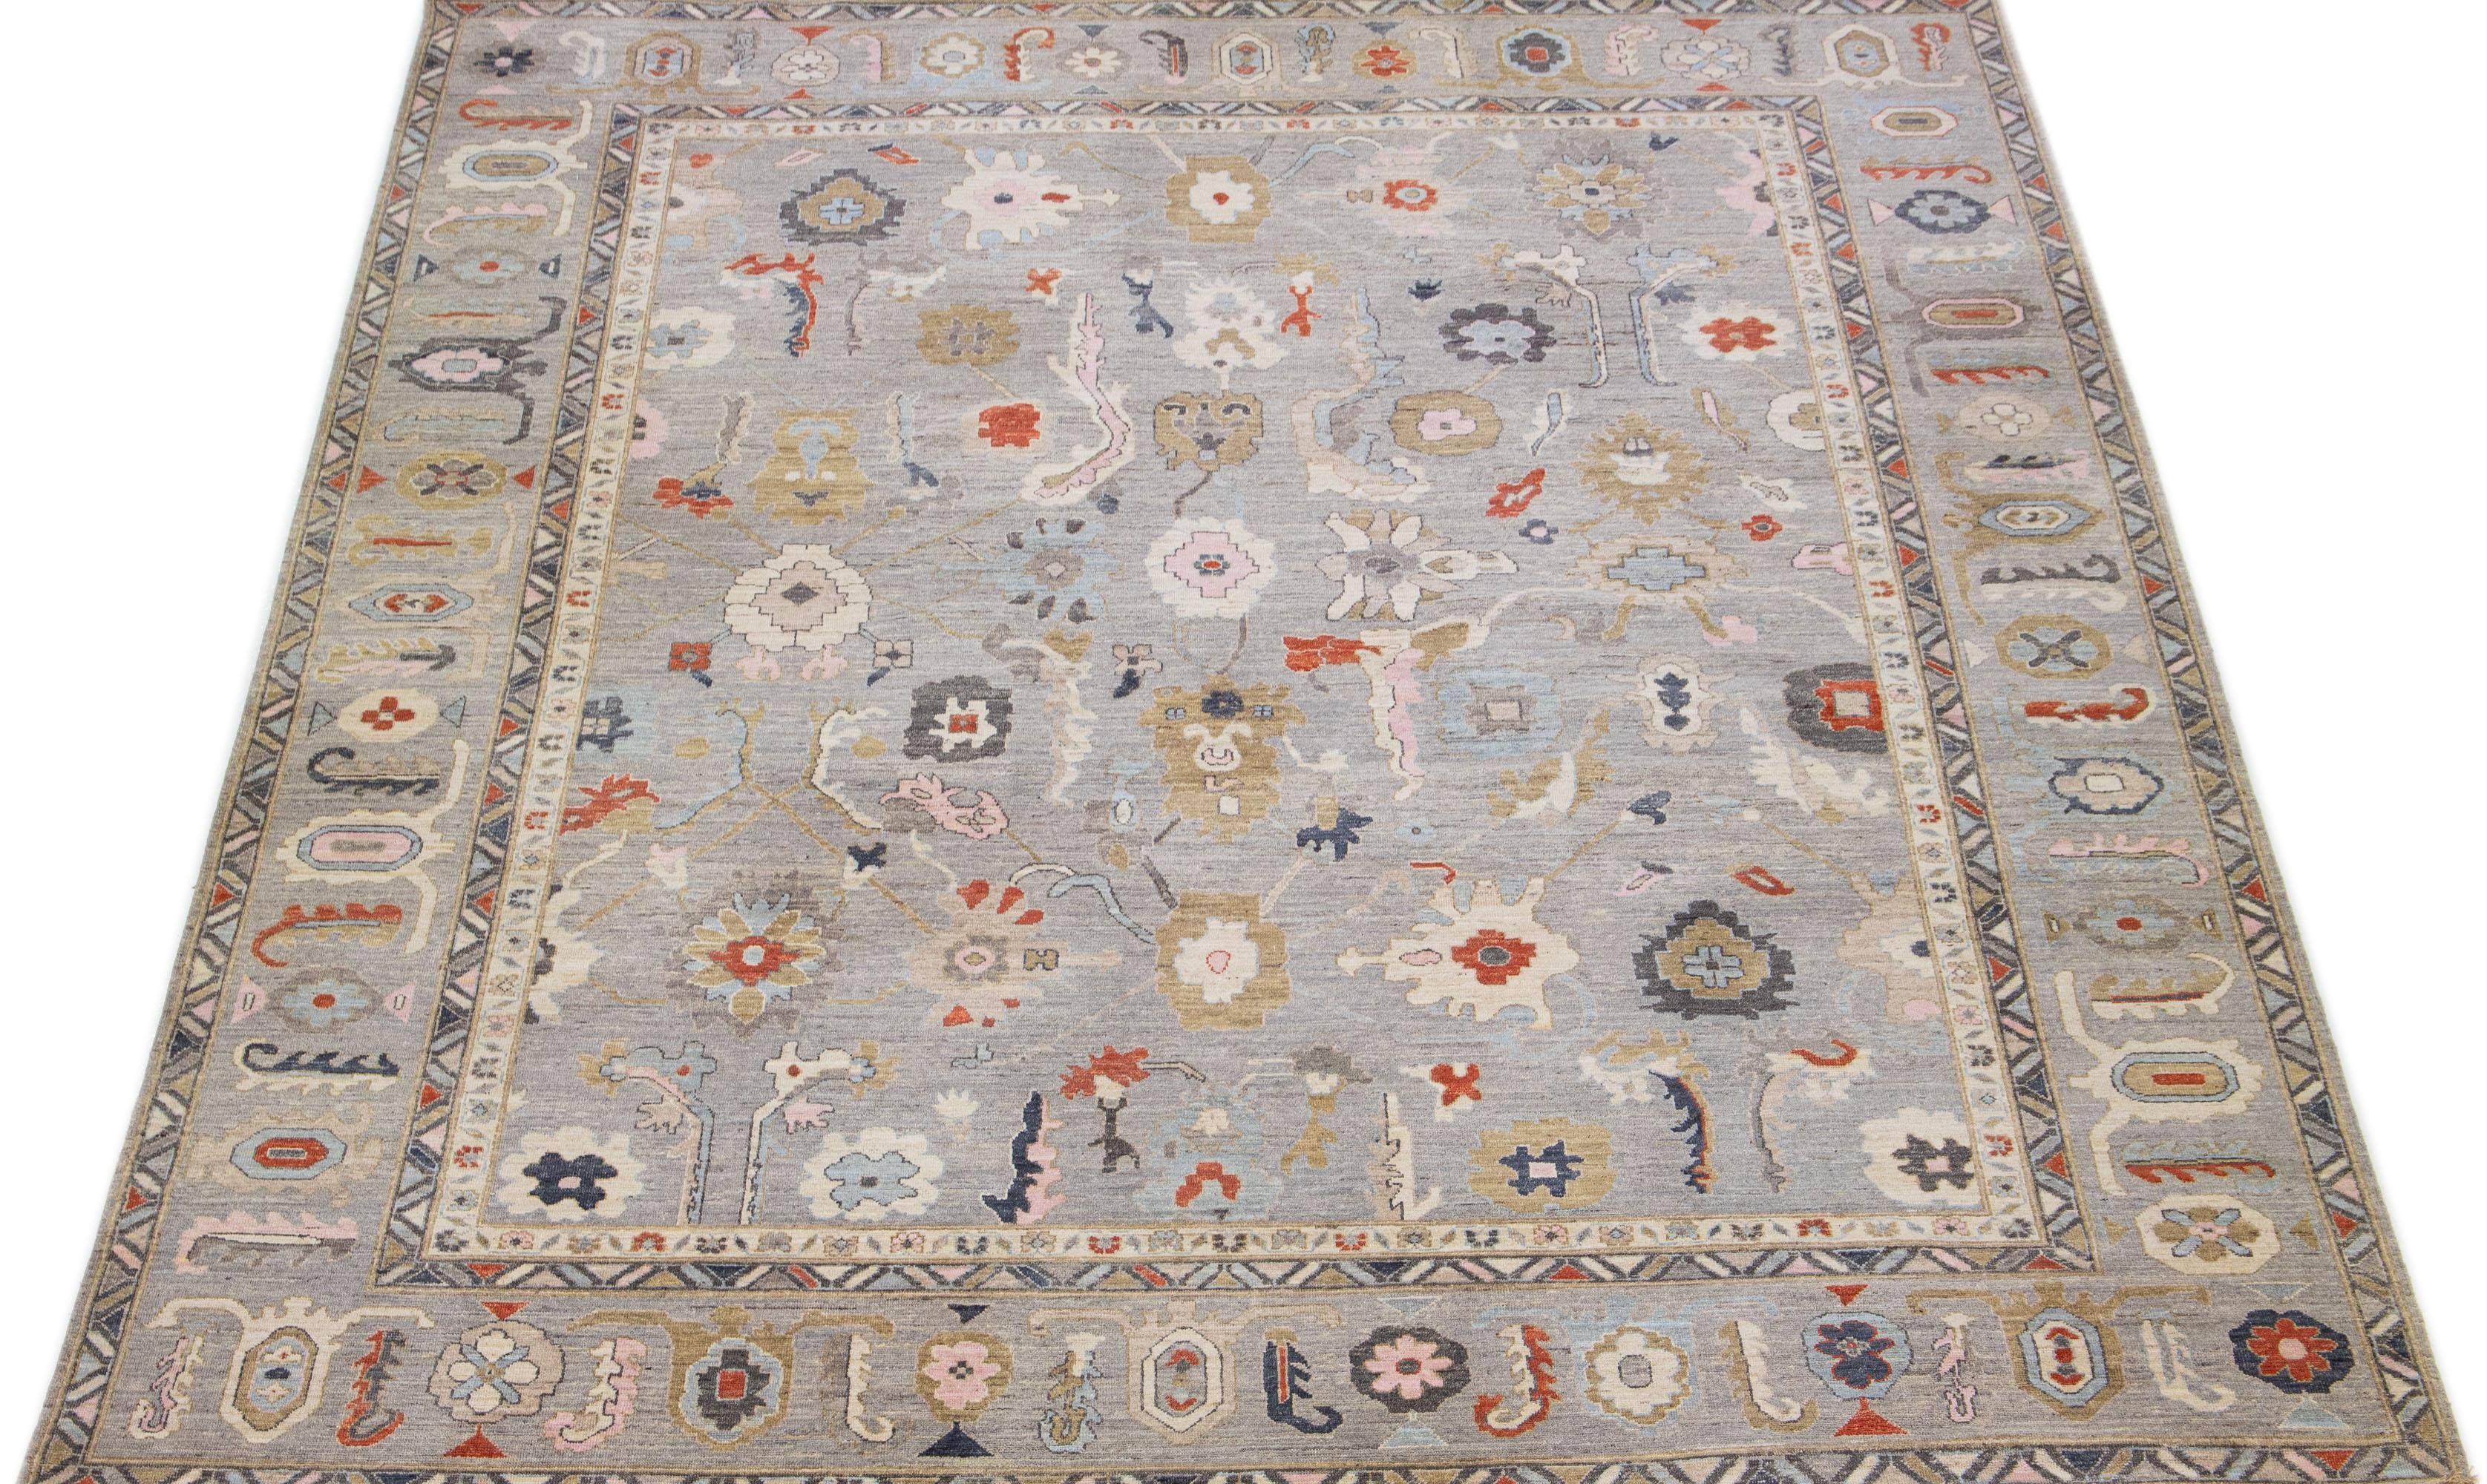 An exquisite oversized Sultanabad hand-knotted wool rug is presented, showcasing a stunning gray field with a design frame. The rug further highlights rust, blue, and pink accents in a breathtaking floral motif that embellishes the entire rug